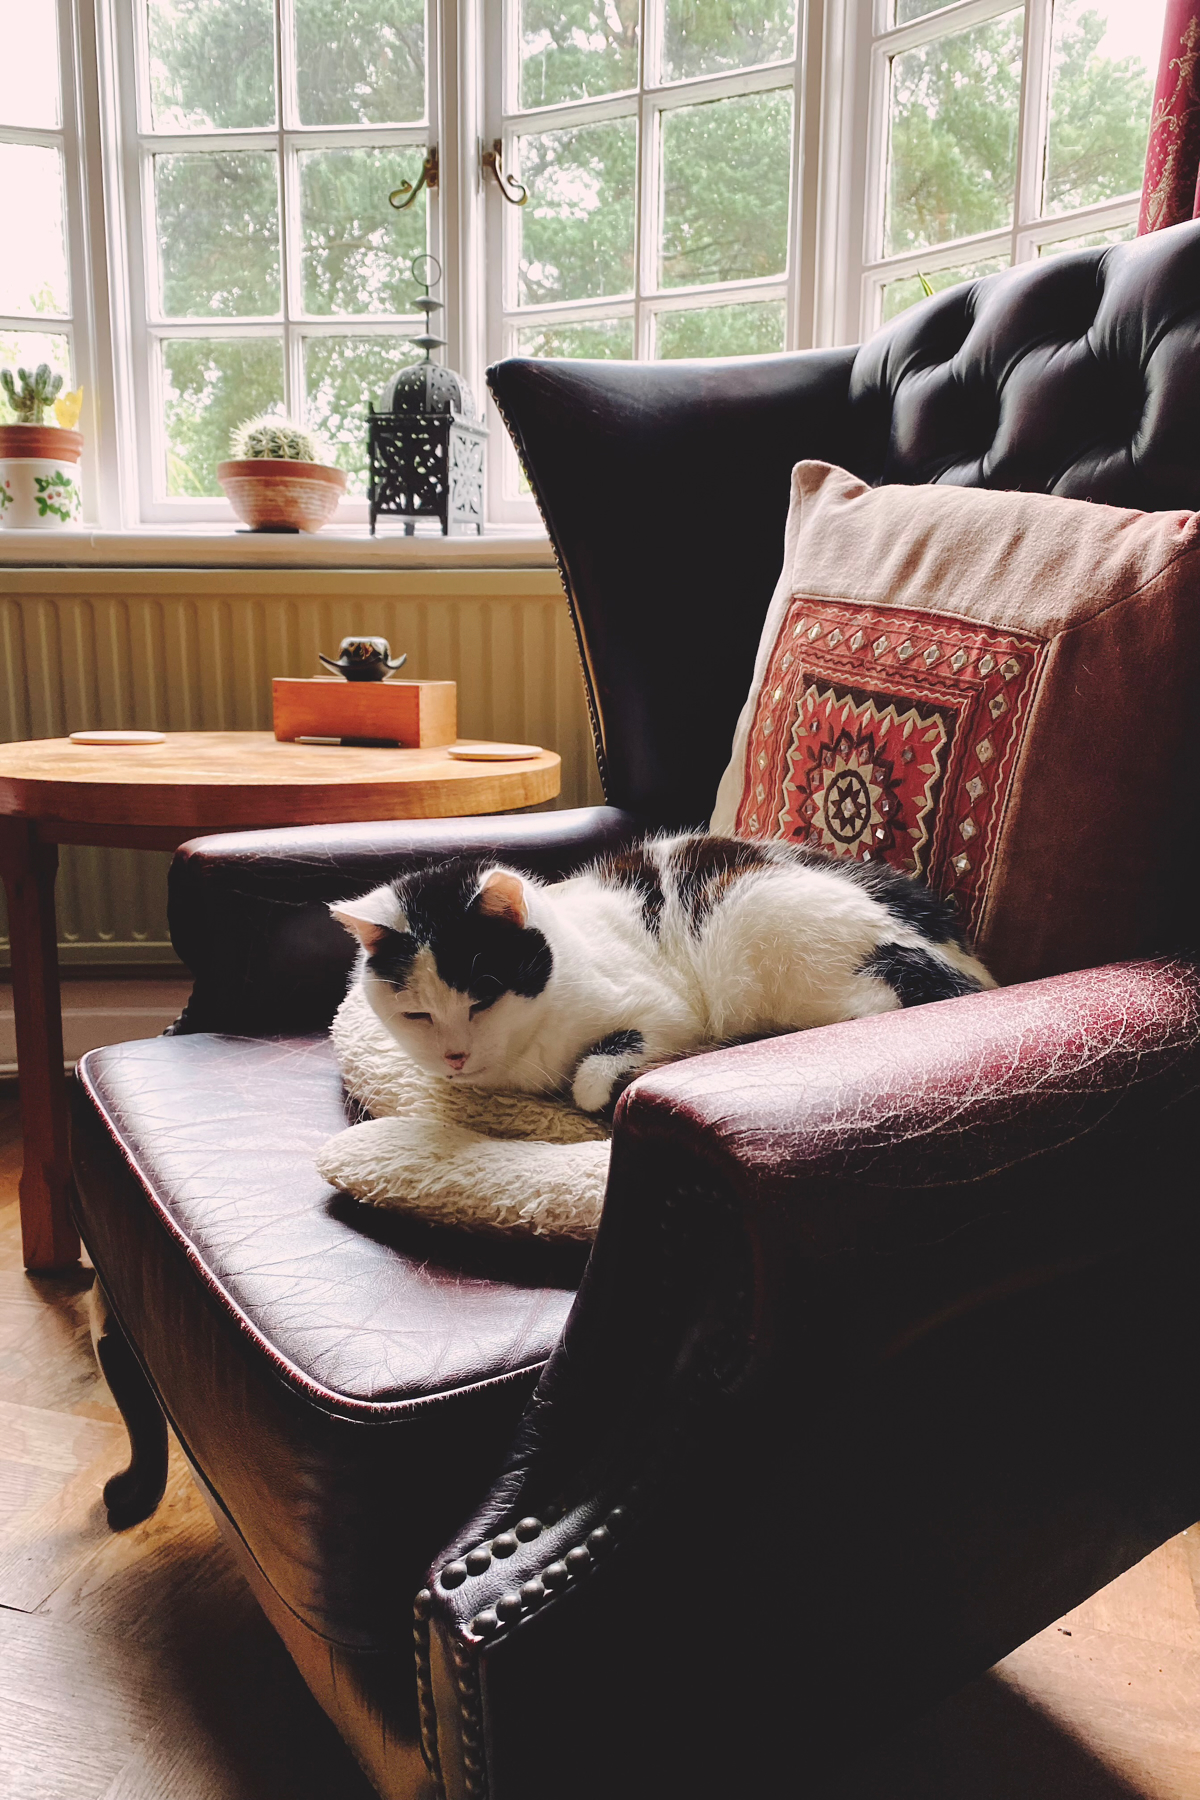 Black and white cat curled up on a cushion on an armchair. Windows in background with no sunshine evident!